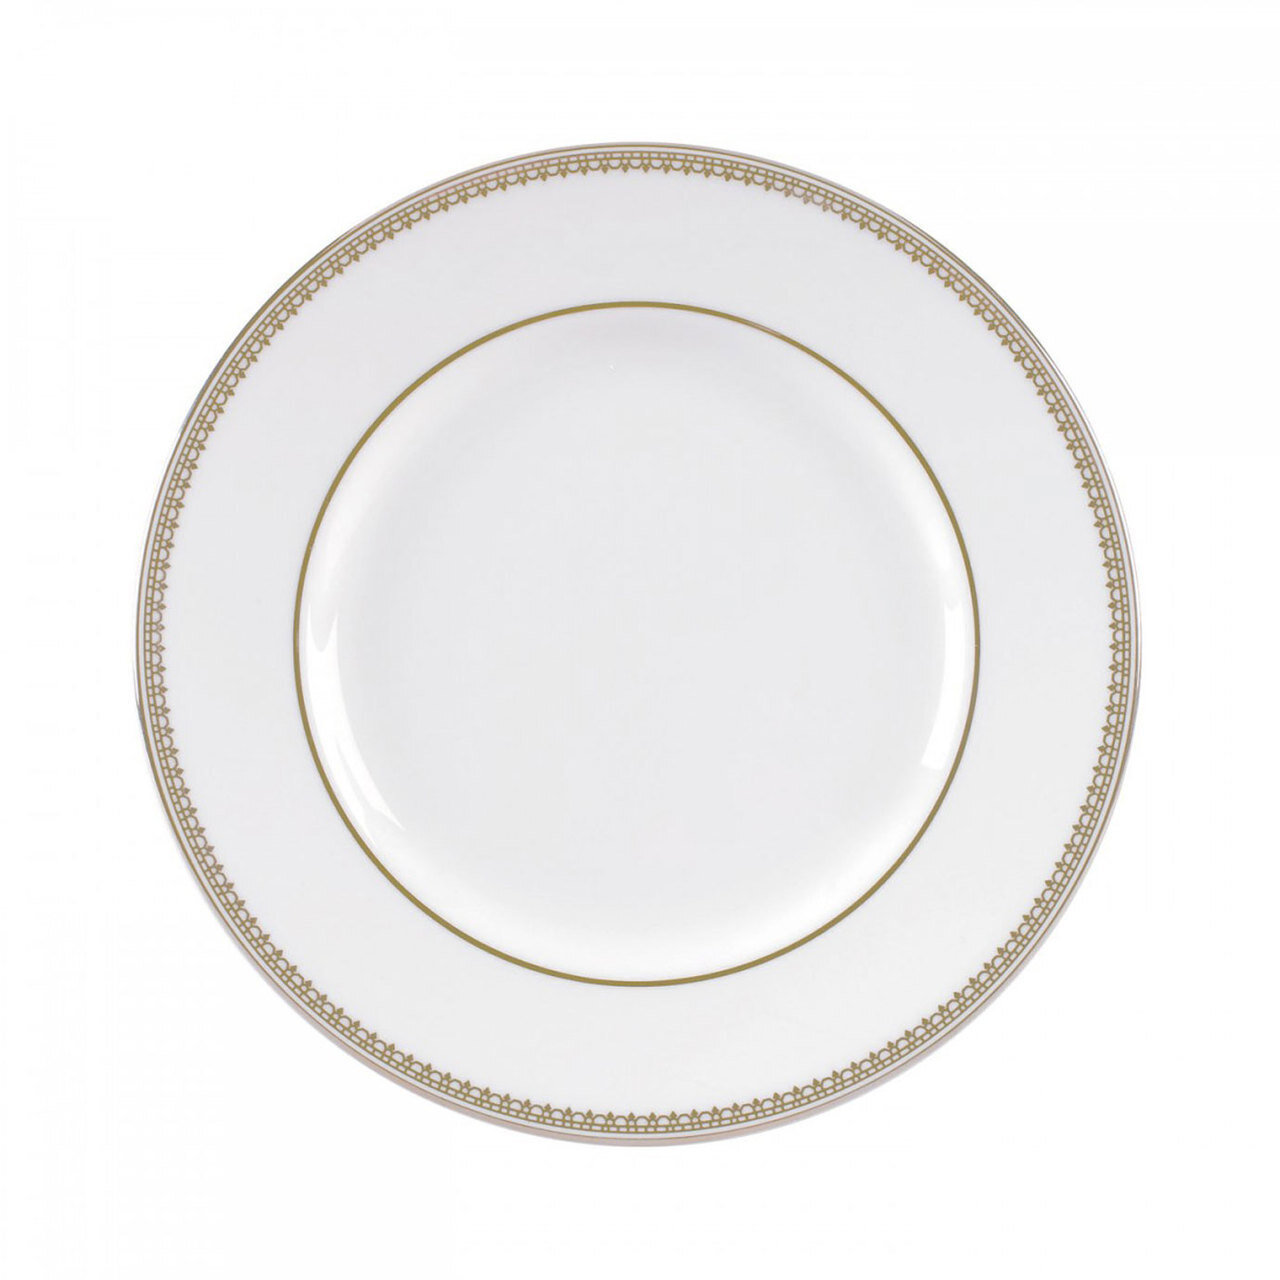 Vera Wang Vera Lace Gold Bread and Butter Plate 6 Inch